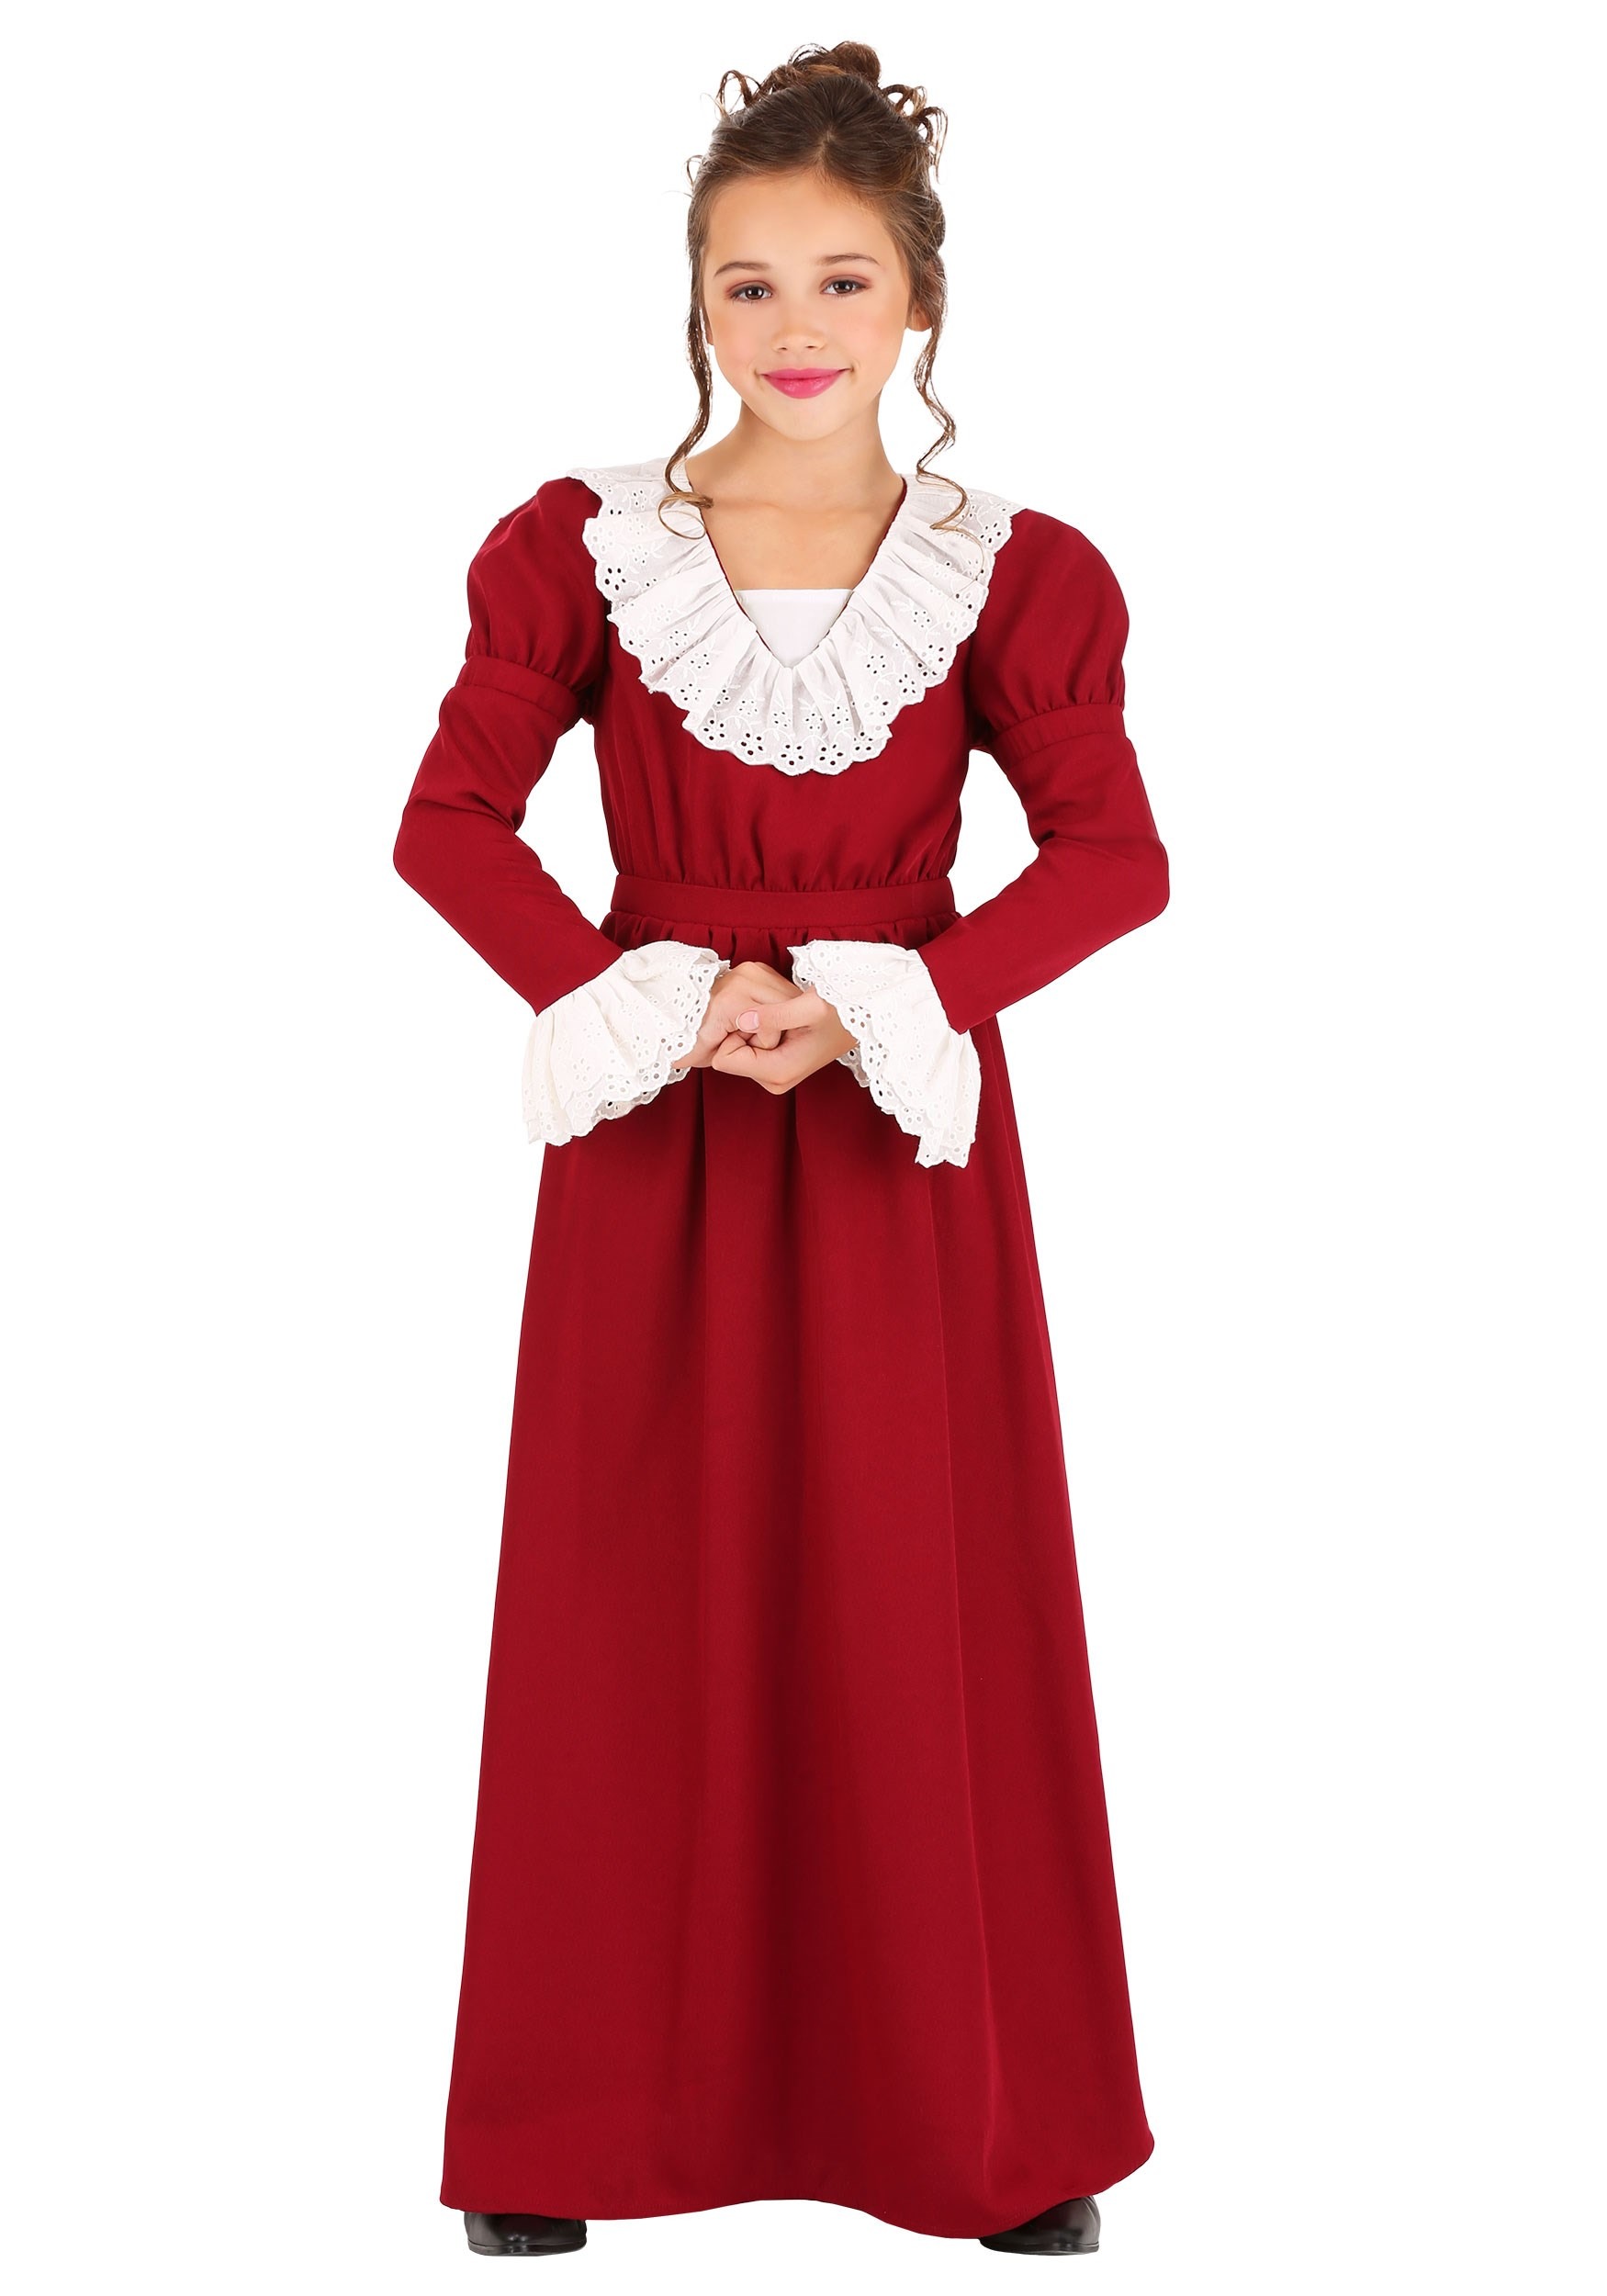 Image of Abigail Adams Costume for Kids | Historical Costumes ID FUN1296CH-L